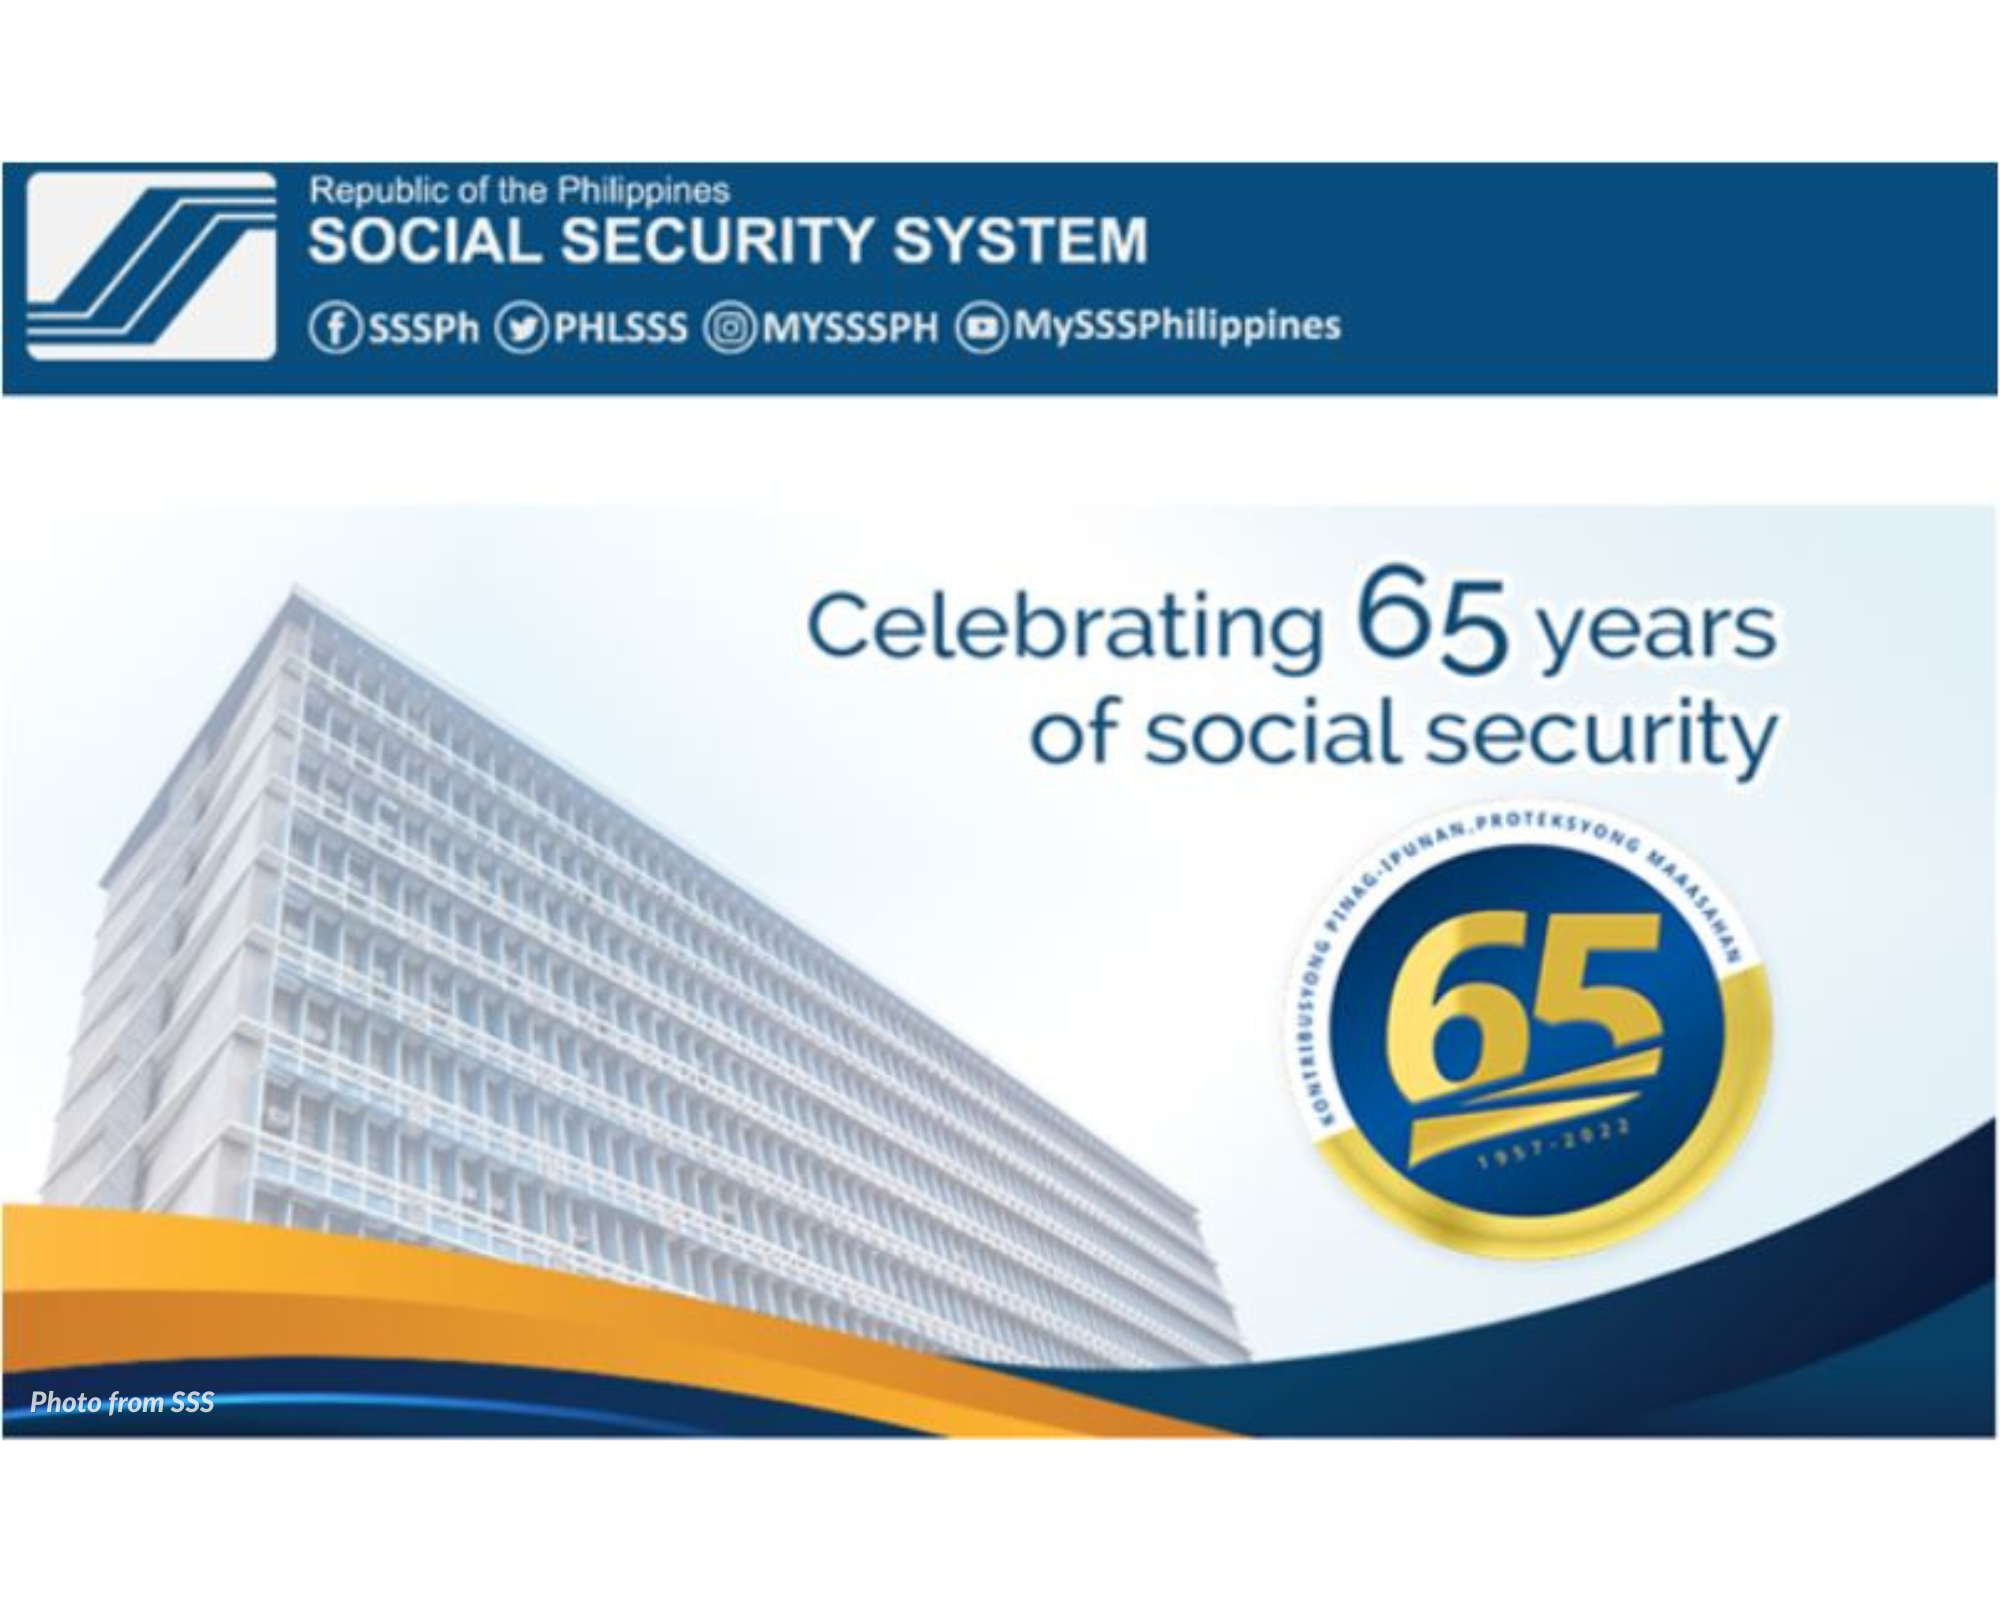 legal-obligations-of-an-employer-under-the-social-security-act-of-2018